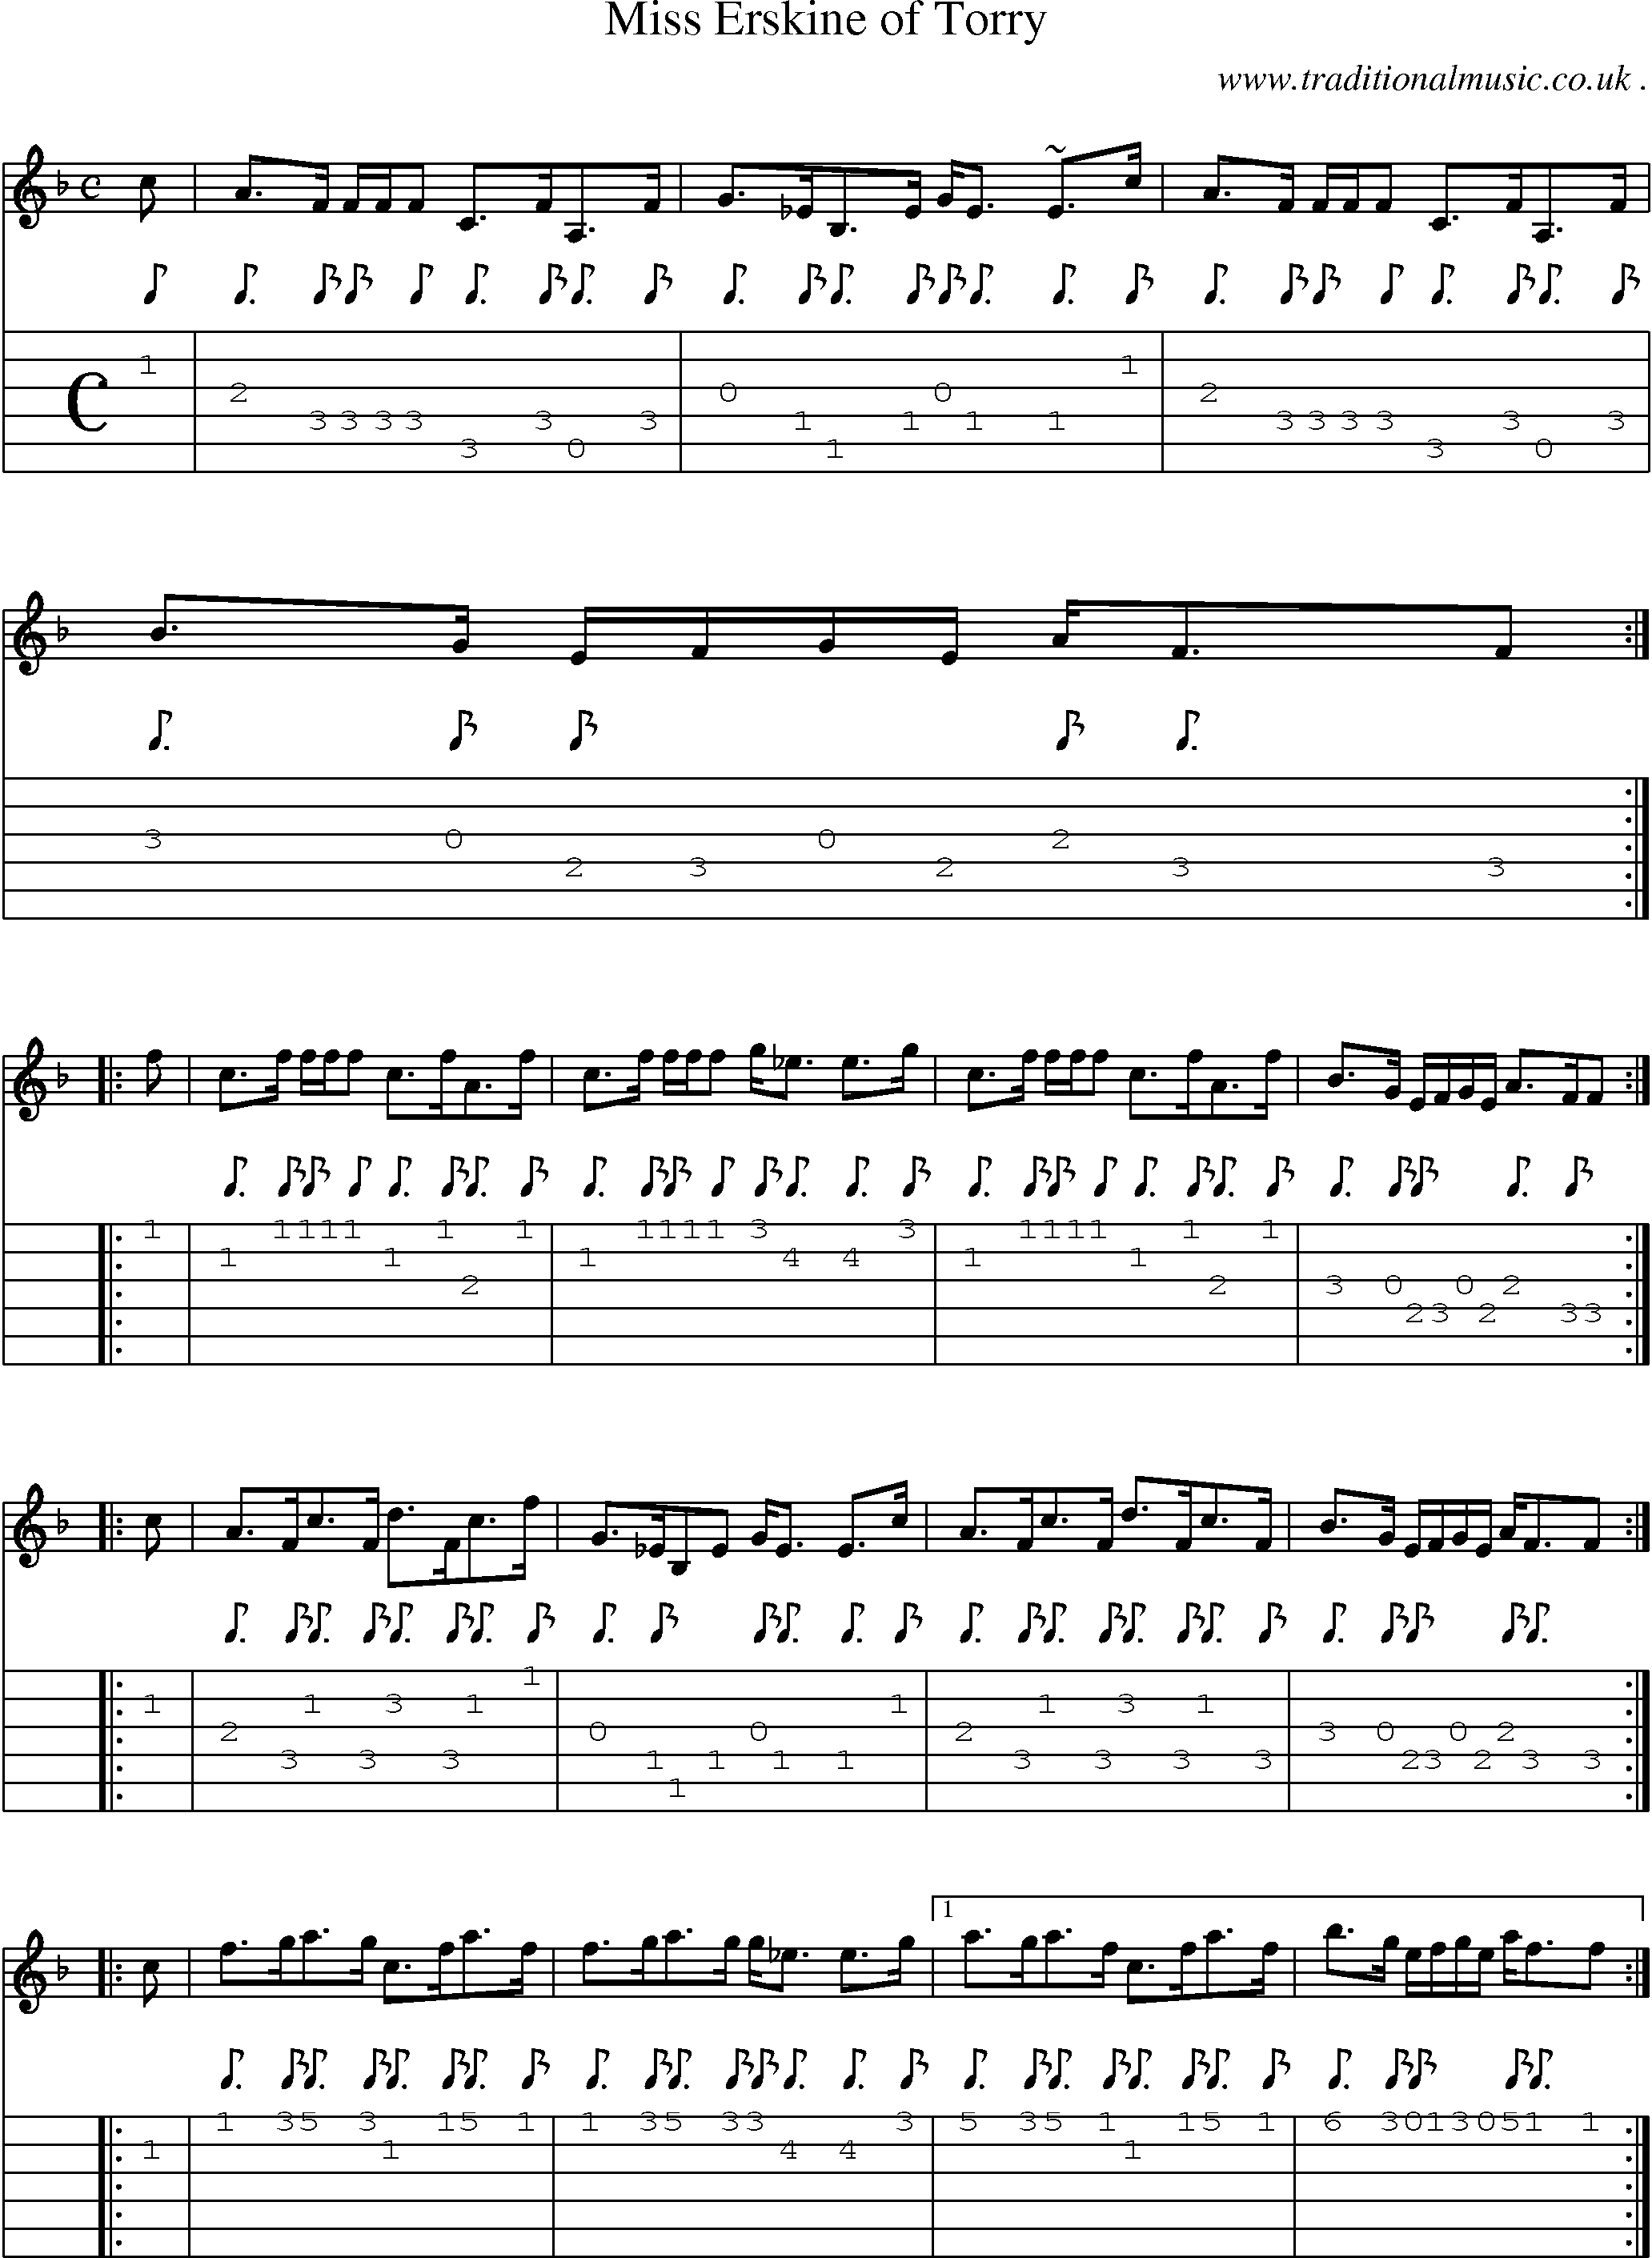 Sheet-music  score, Chords and Guitar Tabs for Miss Erskine Of Torry 